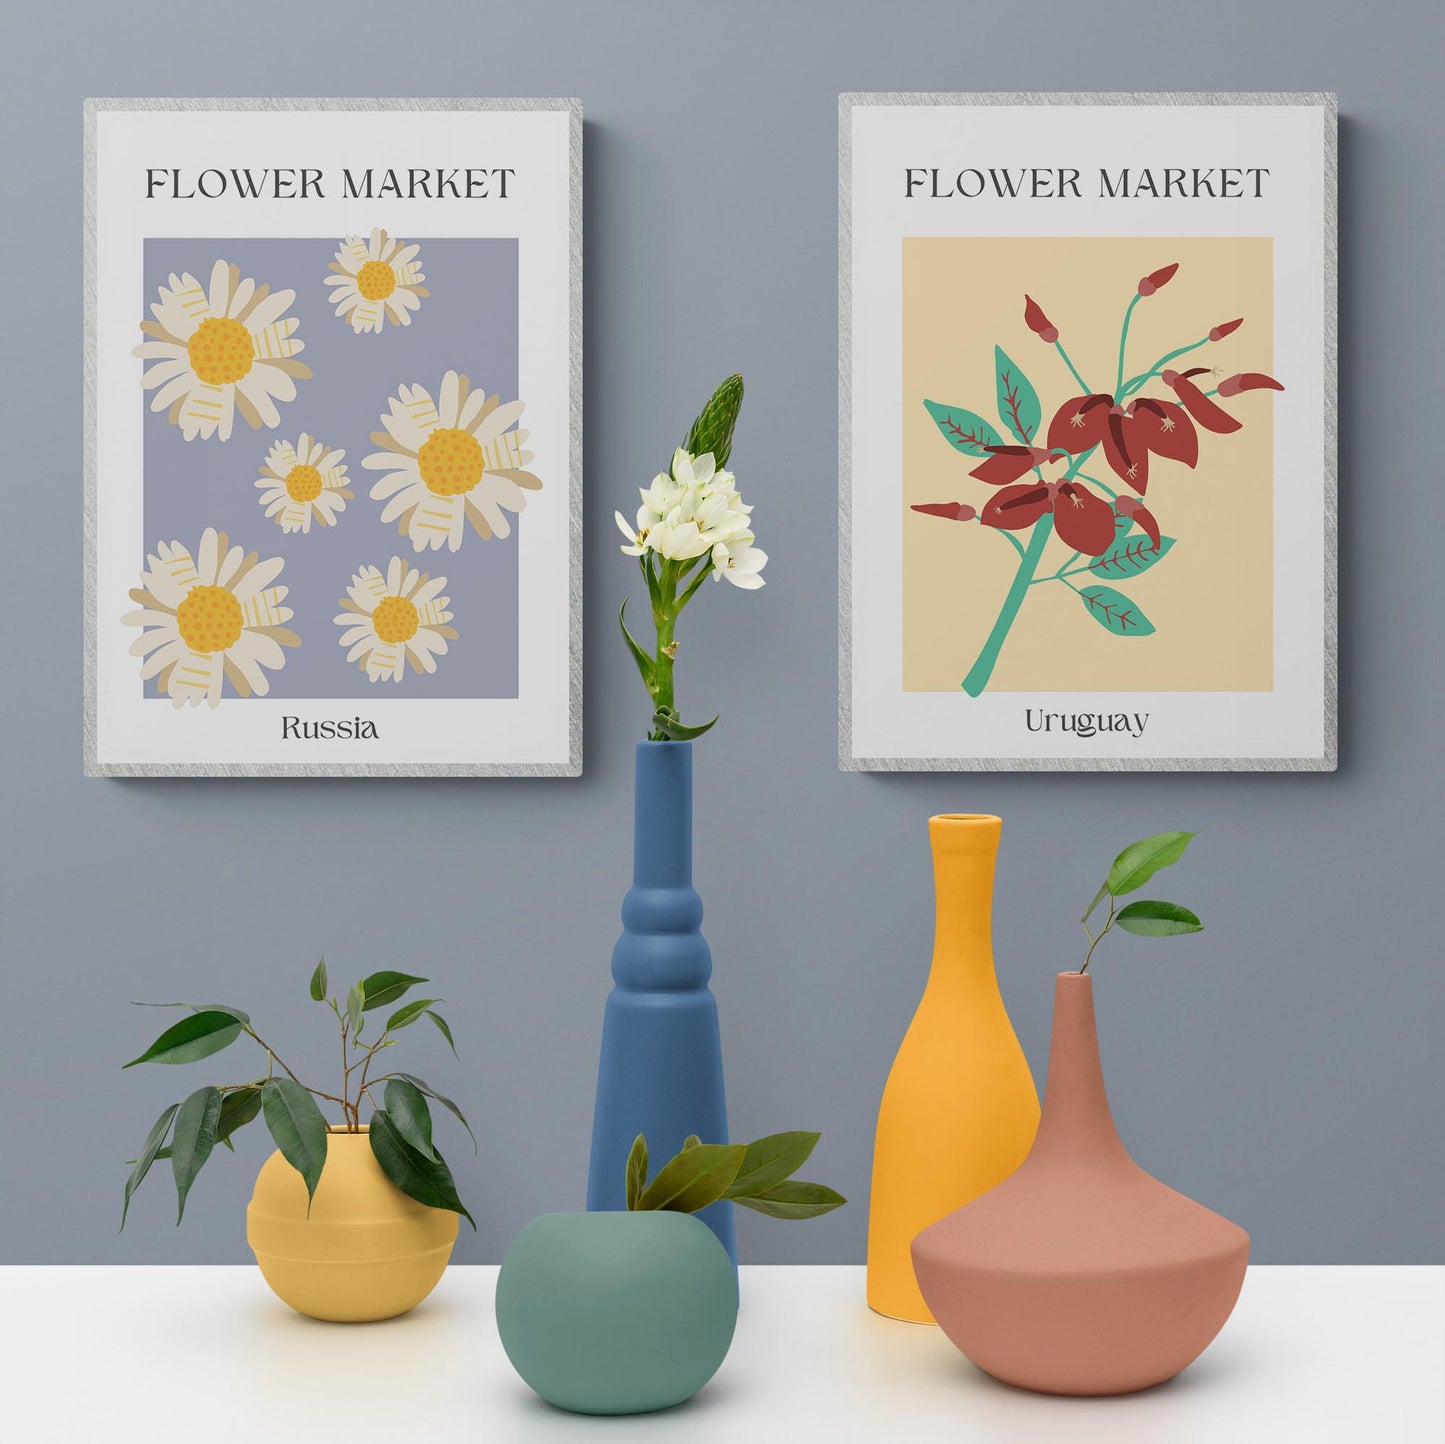 Create a fresh, contemporary look in your home with this beautiful Findland Flowers Market Print. Featuring a modern, graphic design of a flower market, this poster is perfect for adding a touch of Nordic style to your kitchen, bedroom, or living room wall. Ideal for art enthusiasts looking to buy graphic art, this poster is printed on high quality paper for a premium finish. Buy online now for an eye-catching addition to your gallery wall.